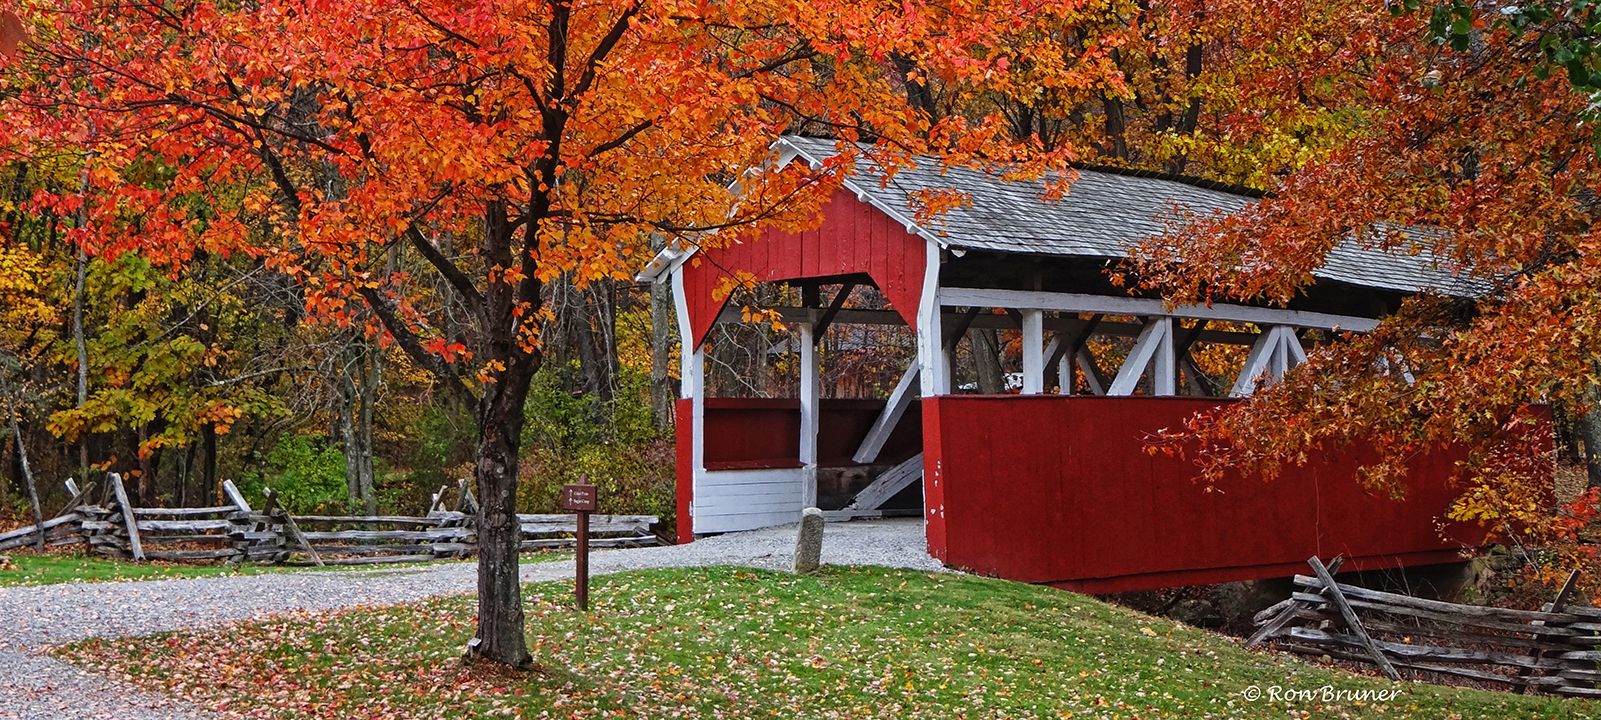 Red and white covered bridge in autumn with colored leaves.